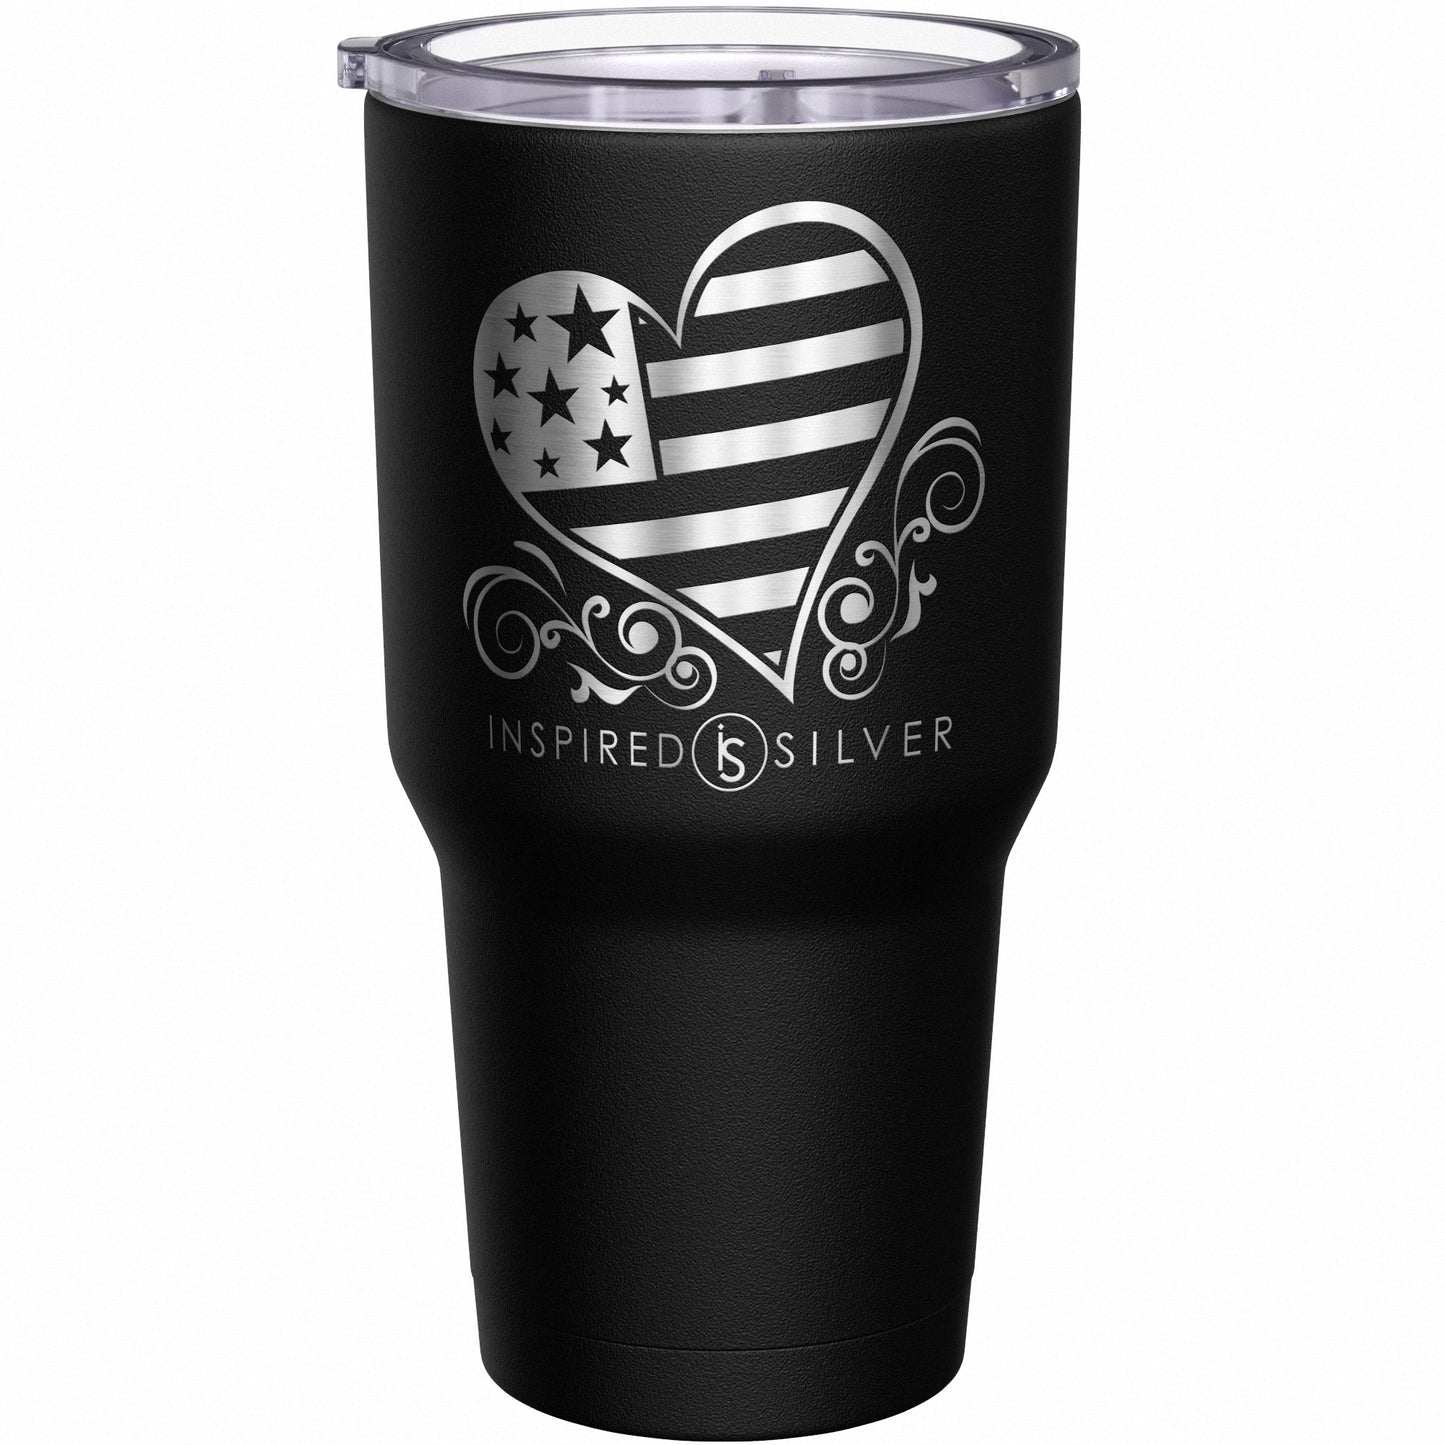 Fighting with Every Breath Lung Cancer Awareness Tumbler